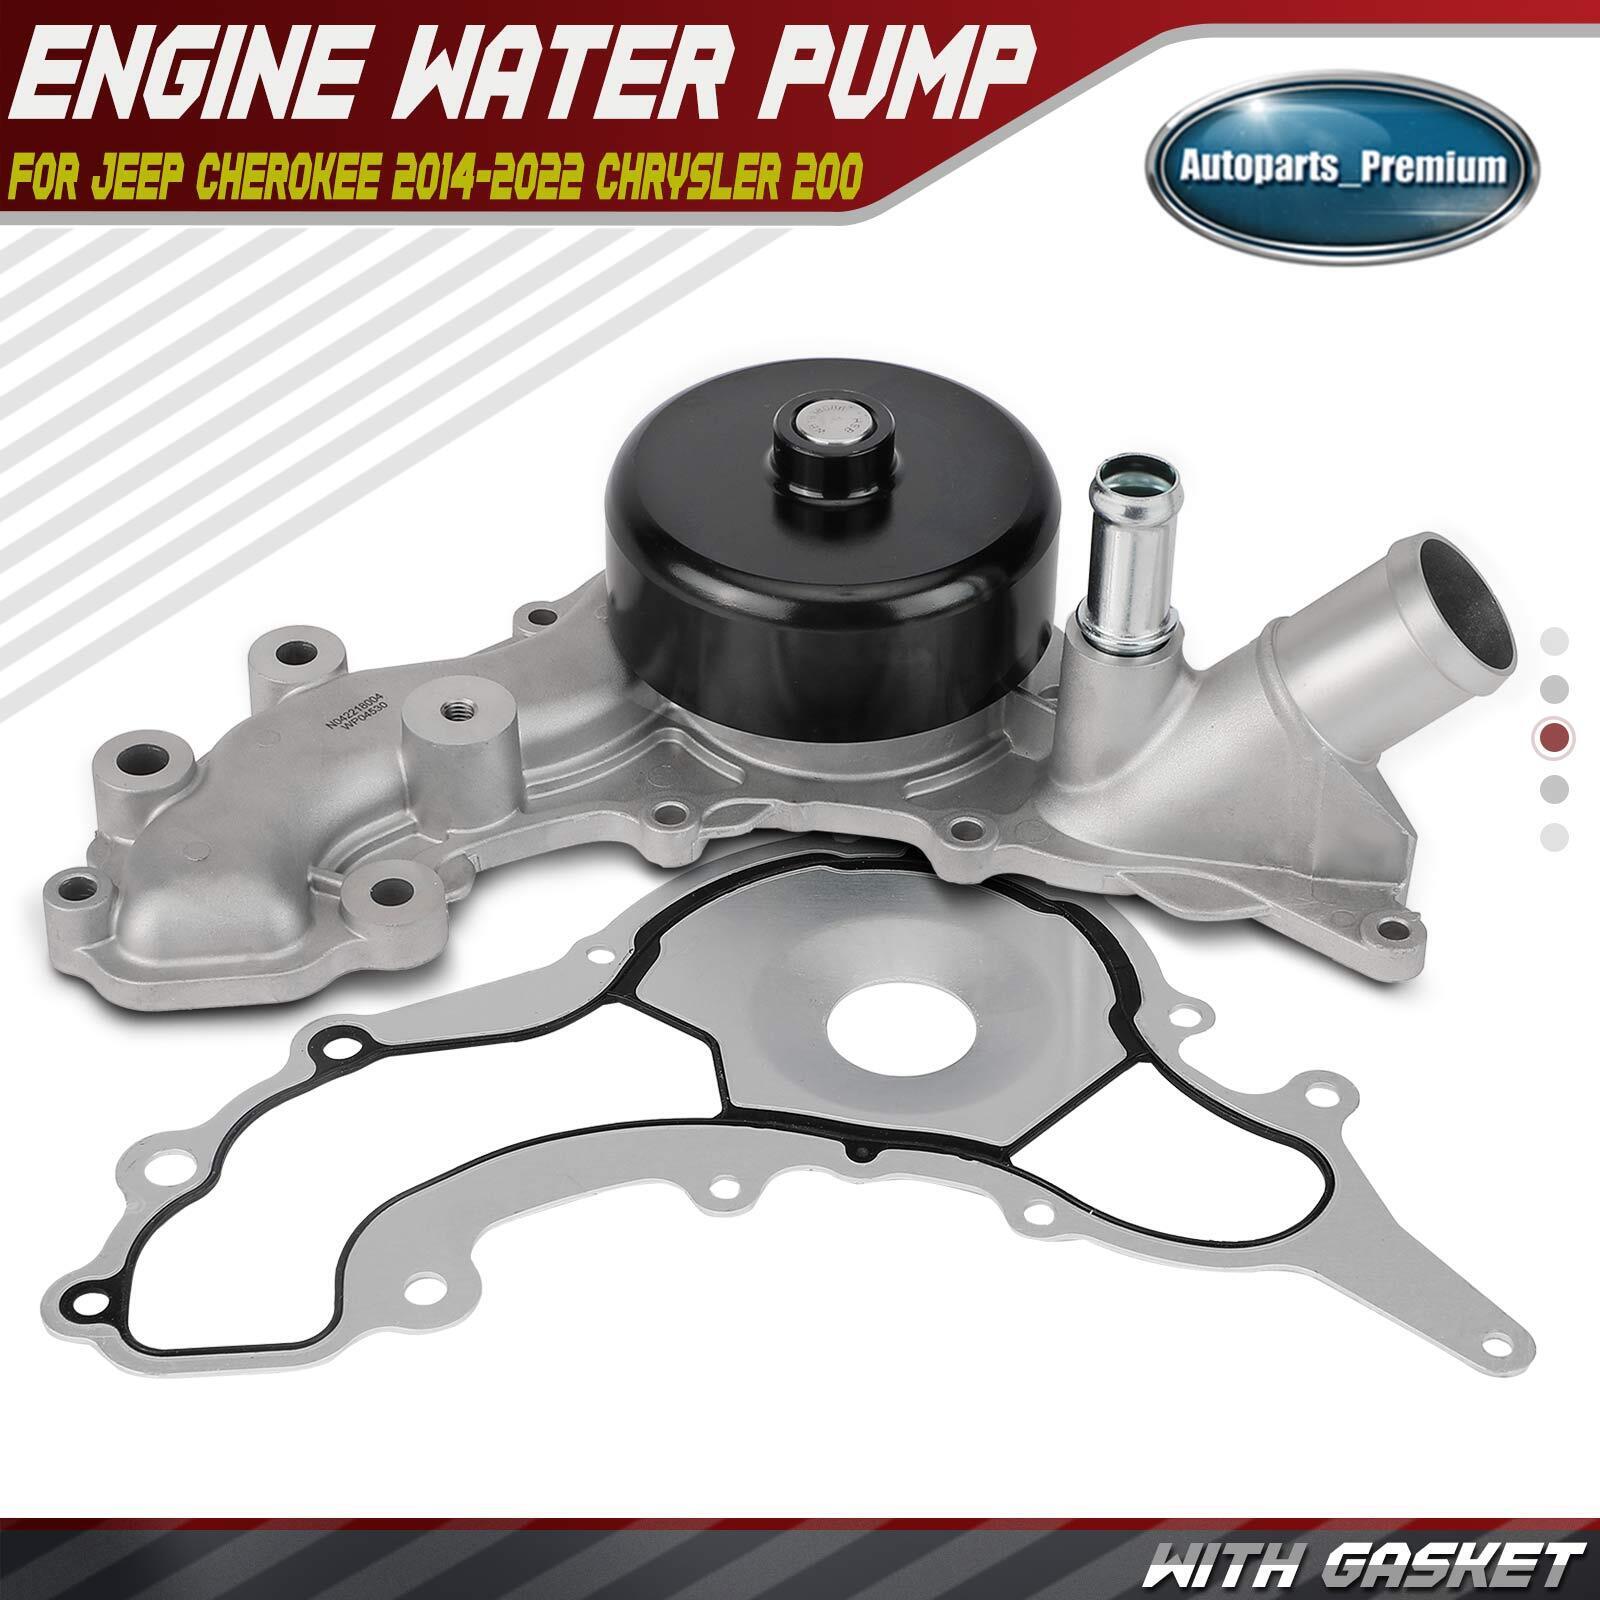 Engine Water Pump for Jeep Cherokee 2014-2022 Chrysler 200 2015-2017 3.6L 3.2L